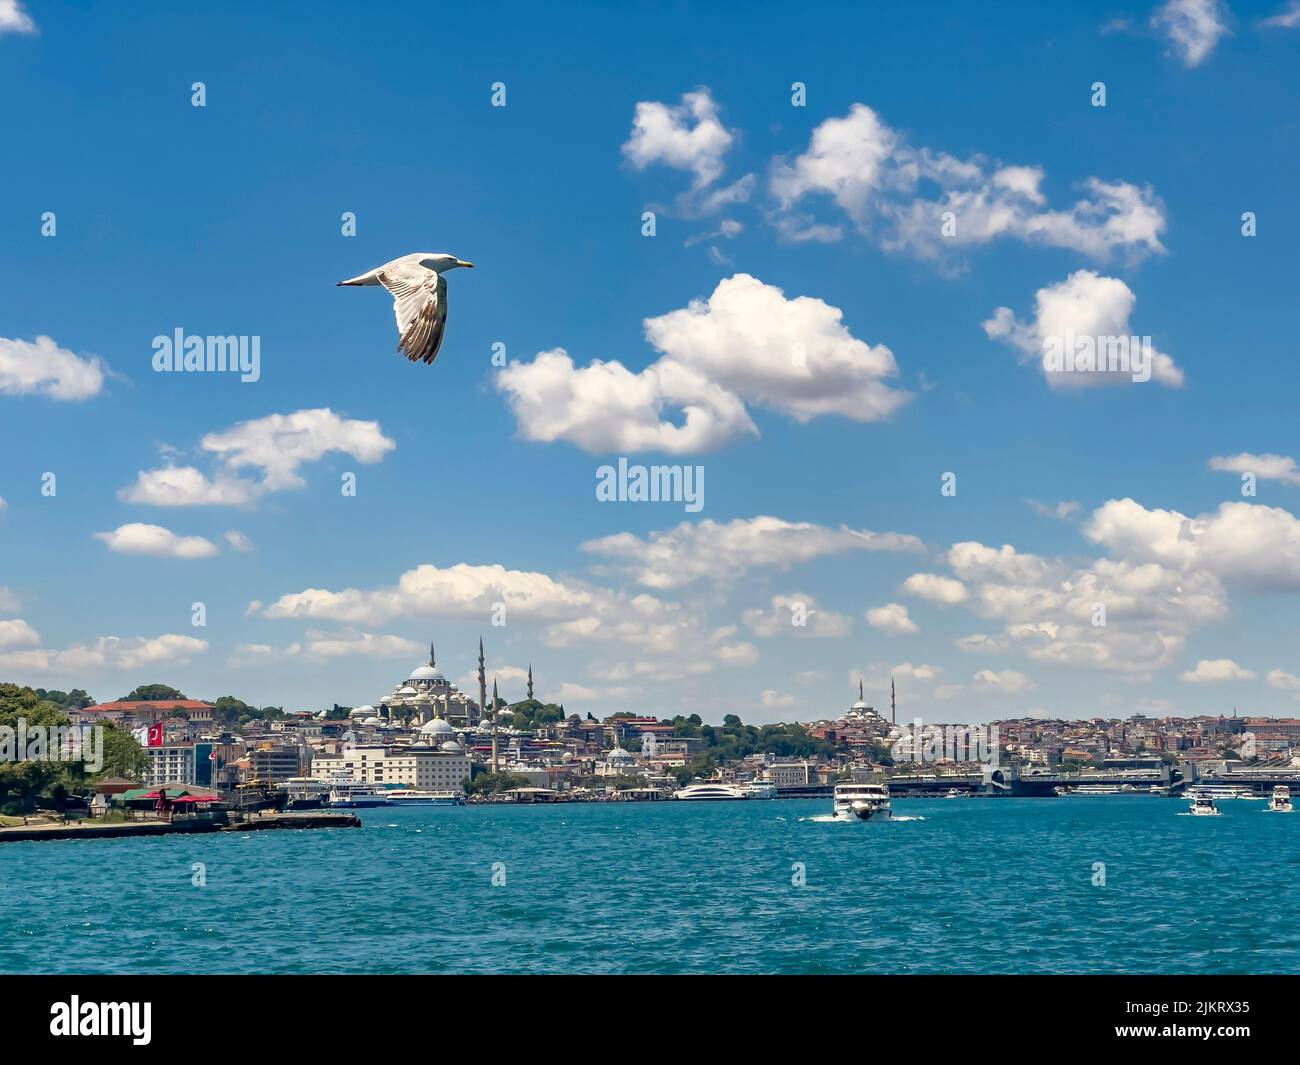 Seagull flying on blue cloudy sky in front of Galata bridge, Yeni Cami (New Mosque) and Suleymaniye Mosque in a row. The entrance of the Golden Horn. Stock Photo